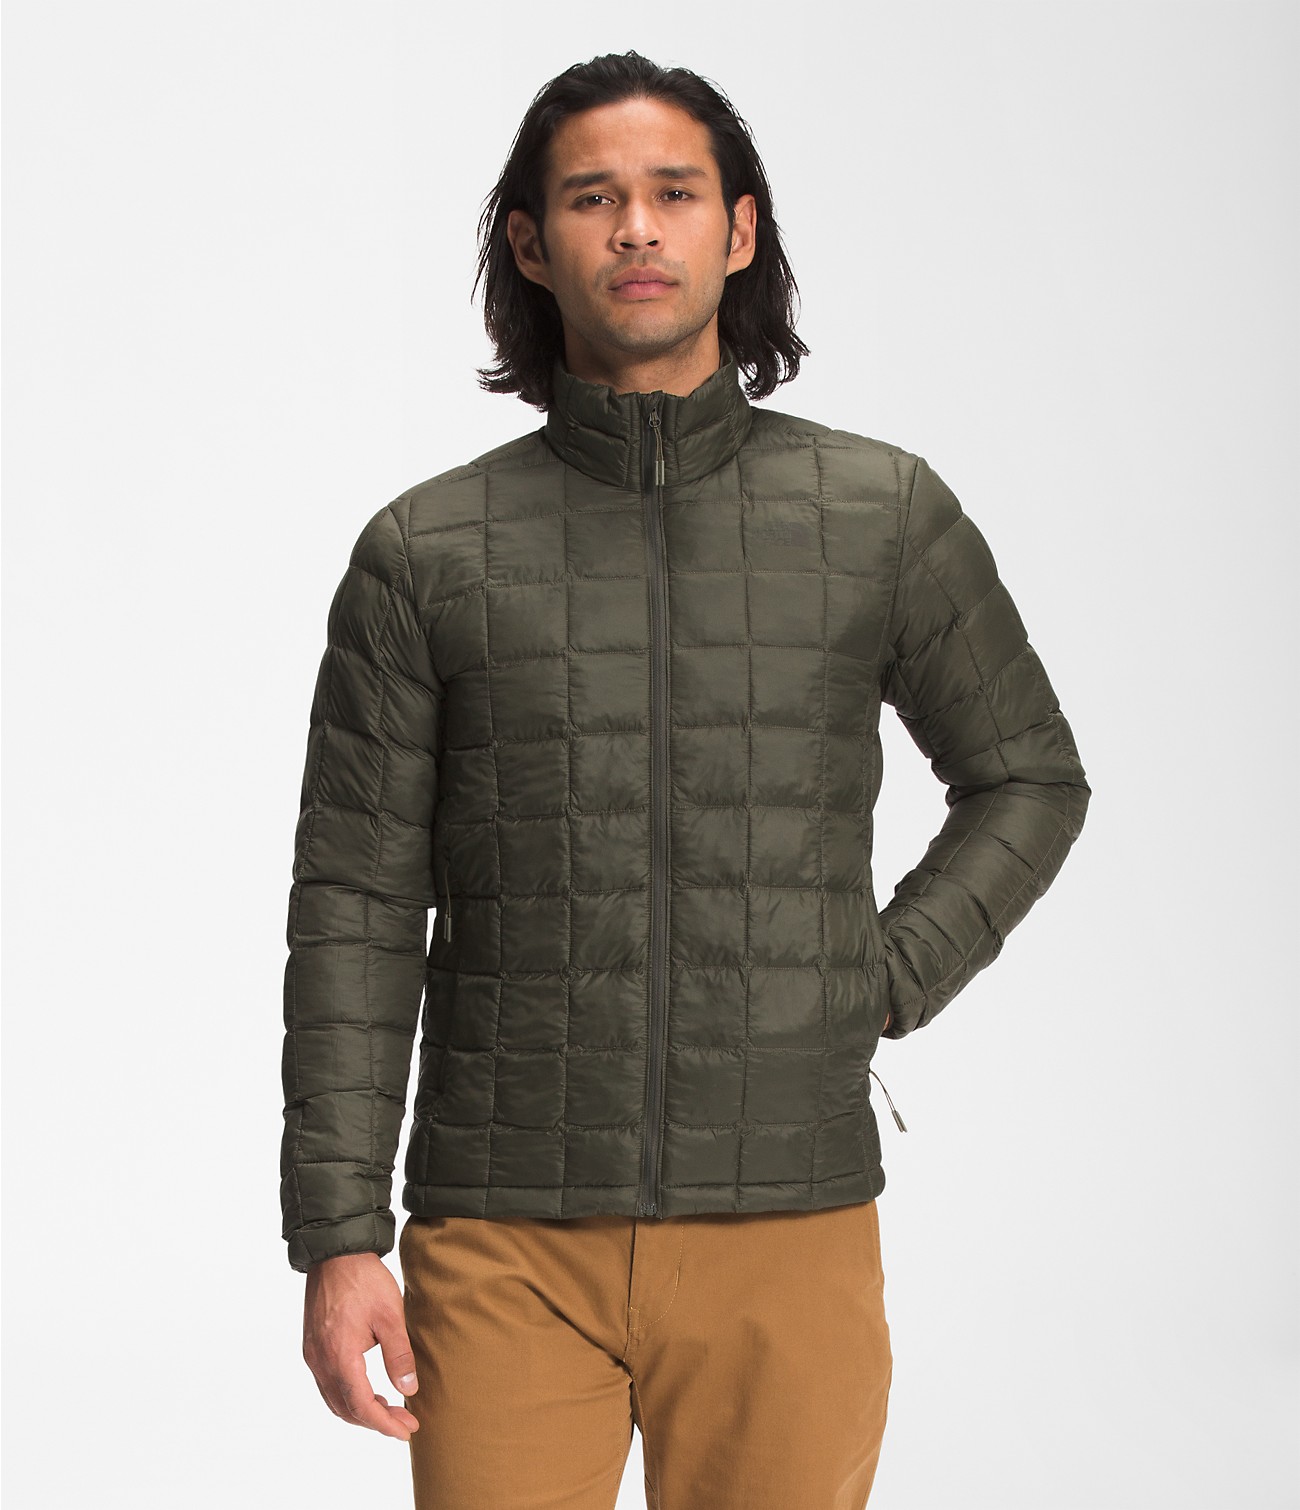 Unlock Wilderness' choice in the L.L.Bean Vs North Face comparison, the ThermoBall™ Eco Jacket 2.0 by The North Face